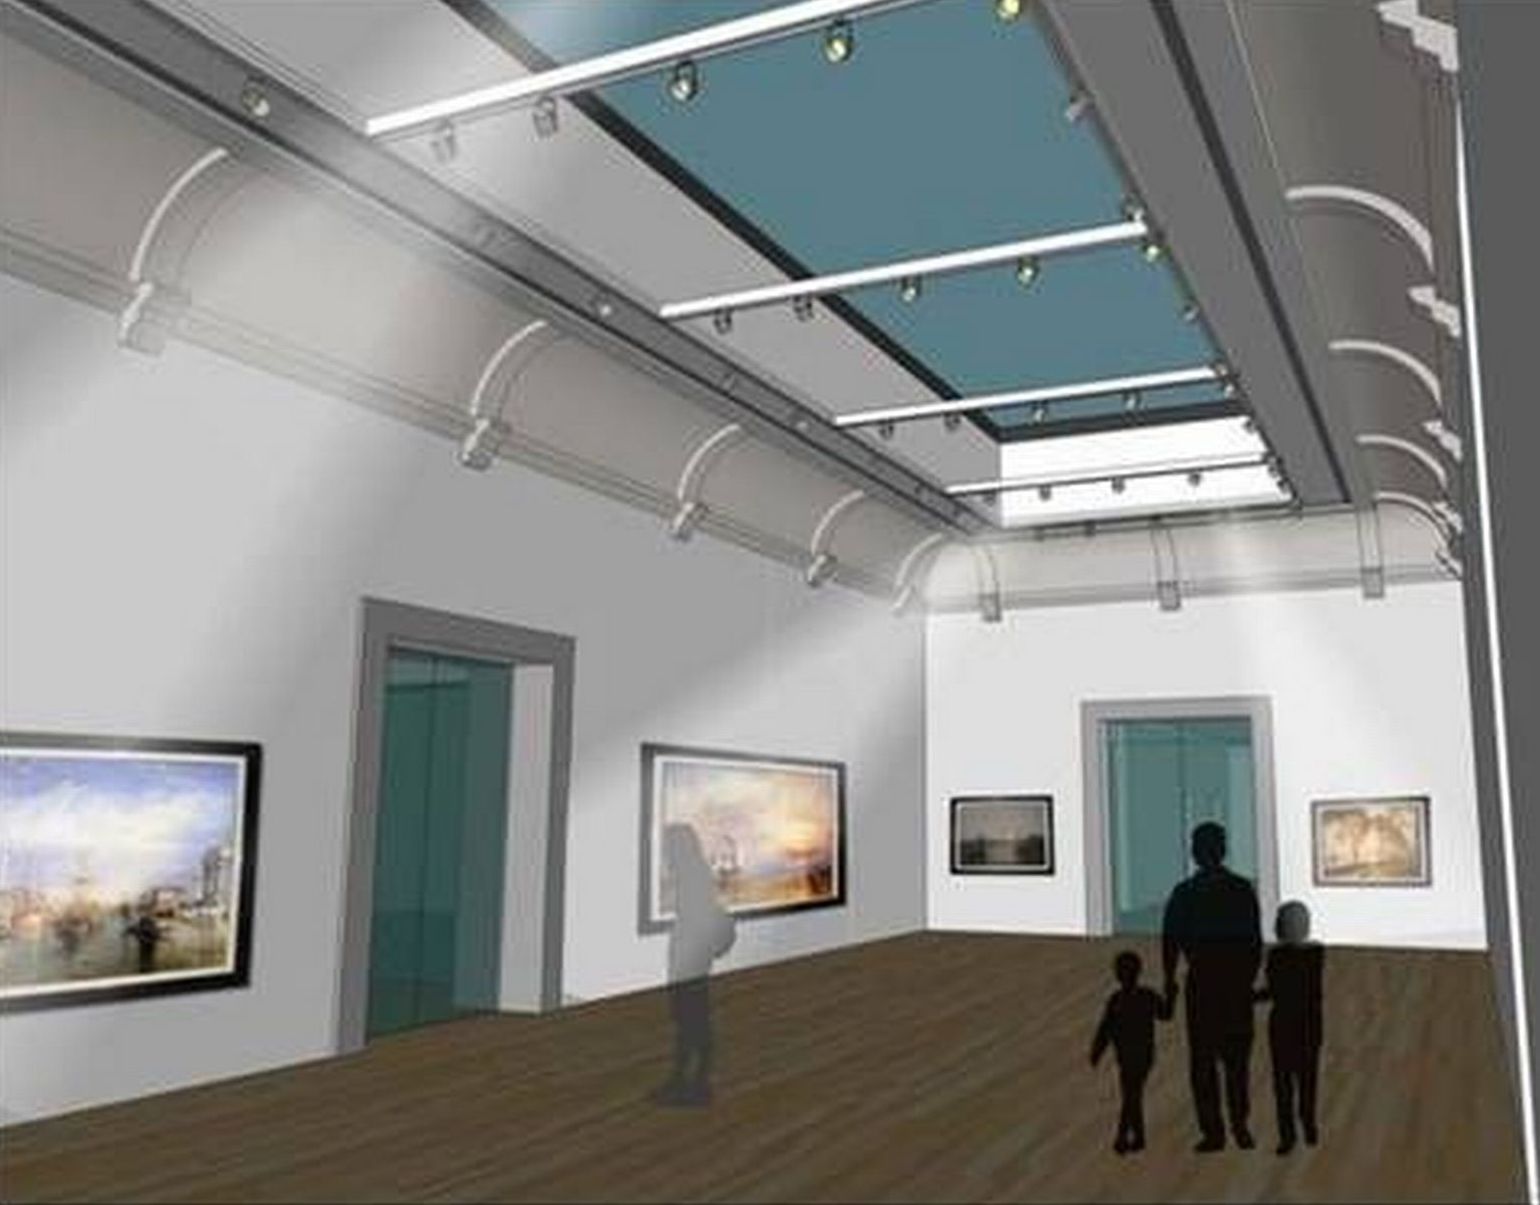 An artist's impression of what The Atkinson in Southport was due to look like before it was opened in 2013